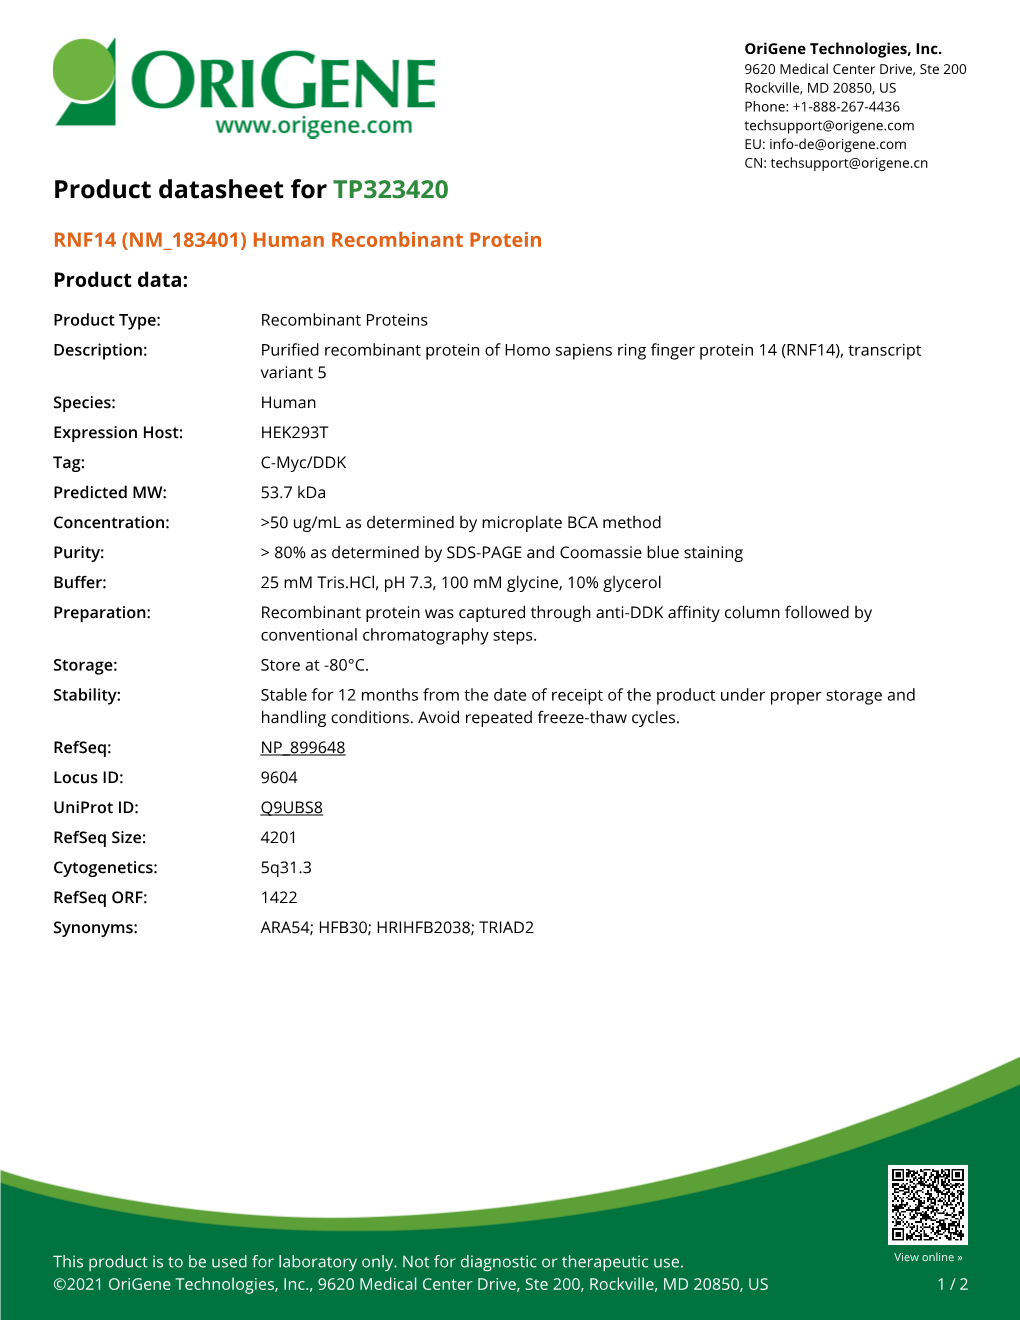 RNF14 (NM 183401) Human Recombinant Protein – TP323420